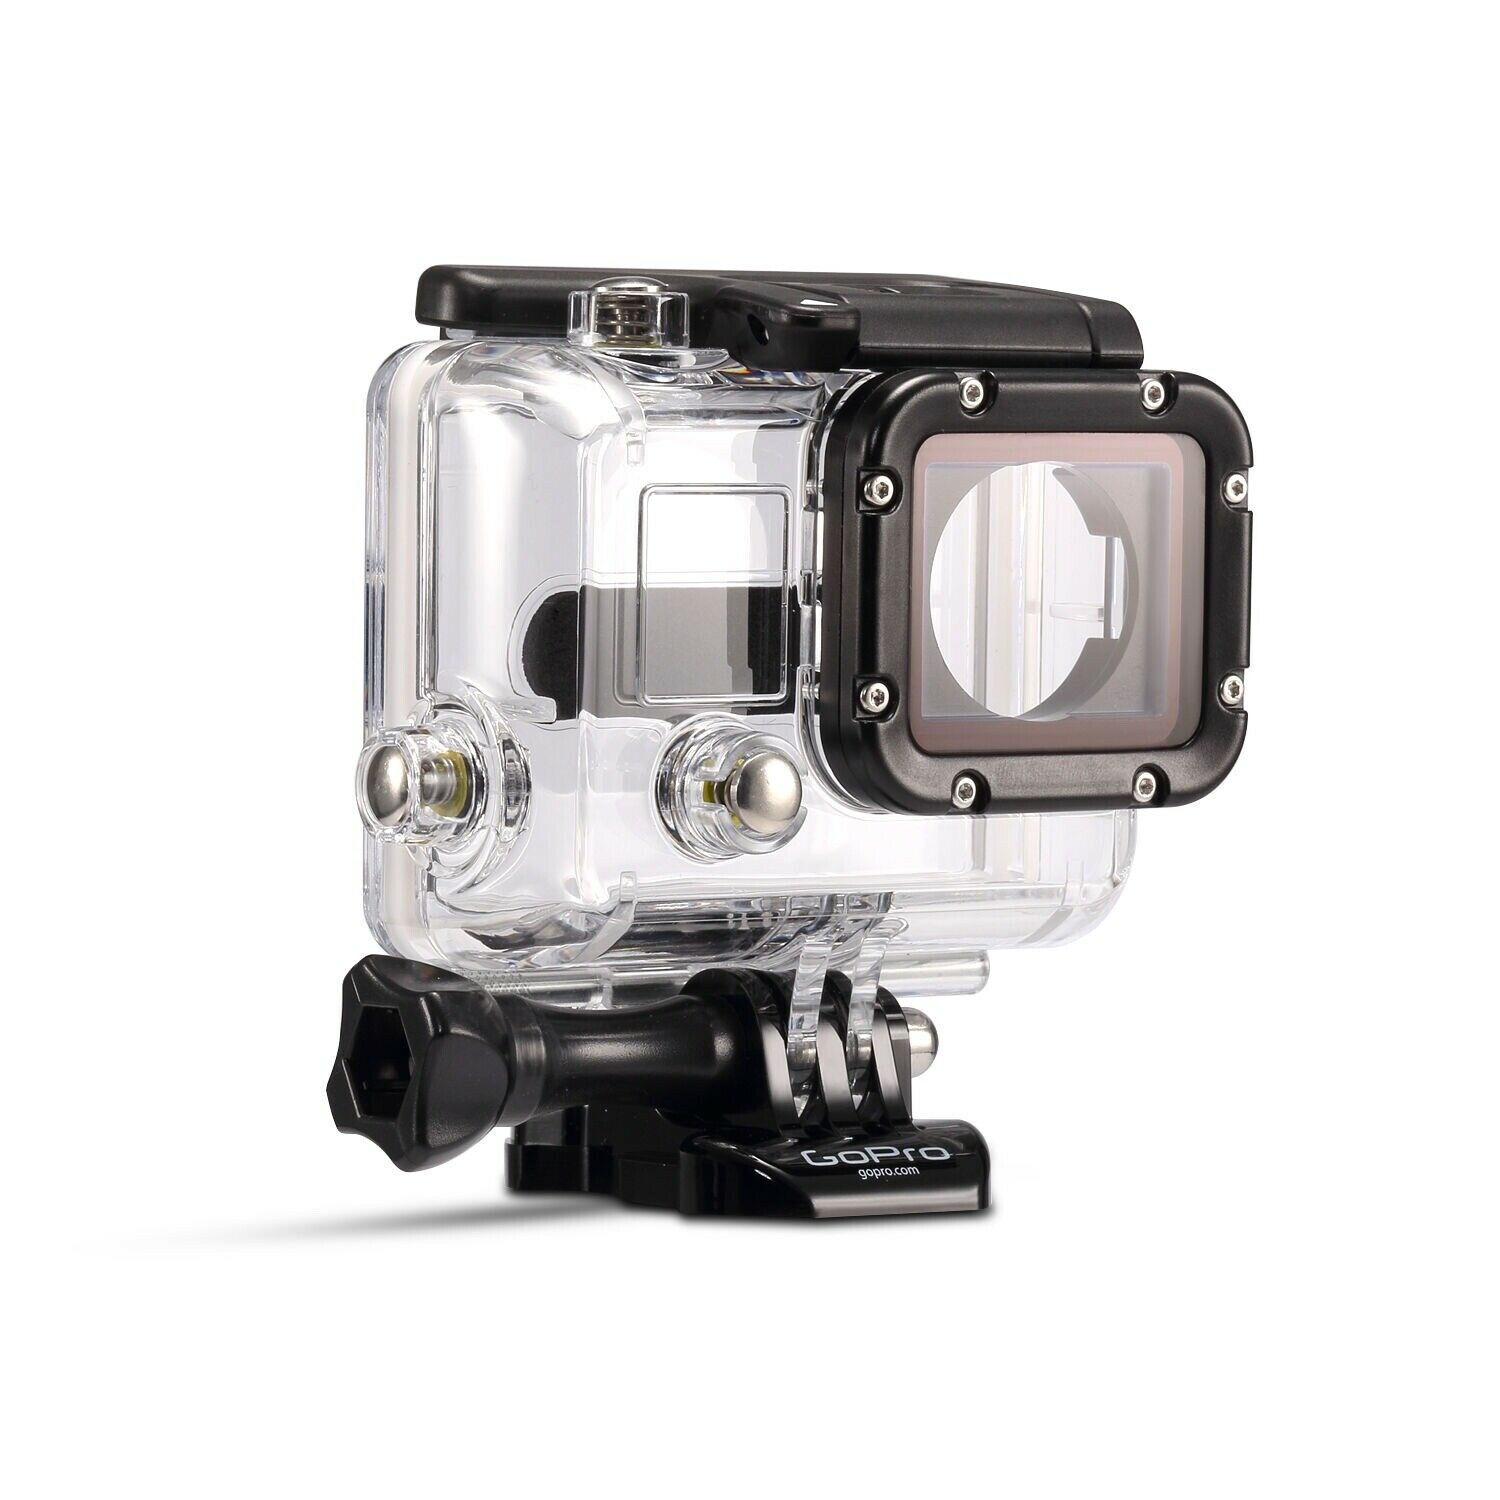 Replacement Genuine GoPro AHDEH-301 Dive Housing 197 Ft for Hero 3/3+/4